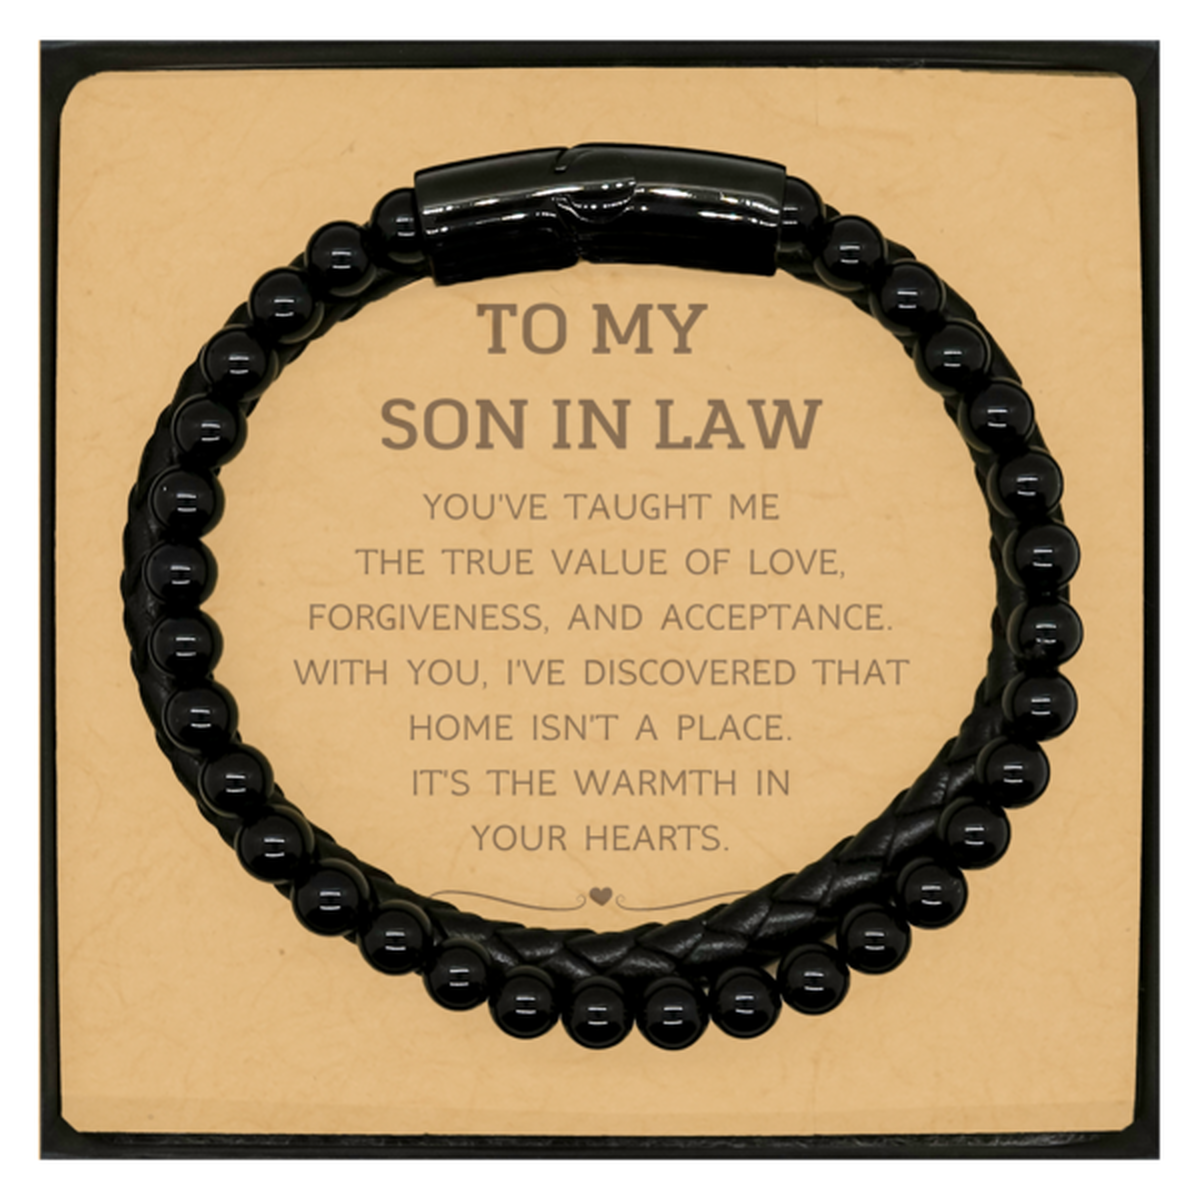 To My Son In Law Gifts, You've taught me the true value of love, Thank You Gifts For Son In Law, Birthday Christmas Stone Leather Bracelets For Son In Law